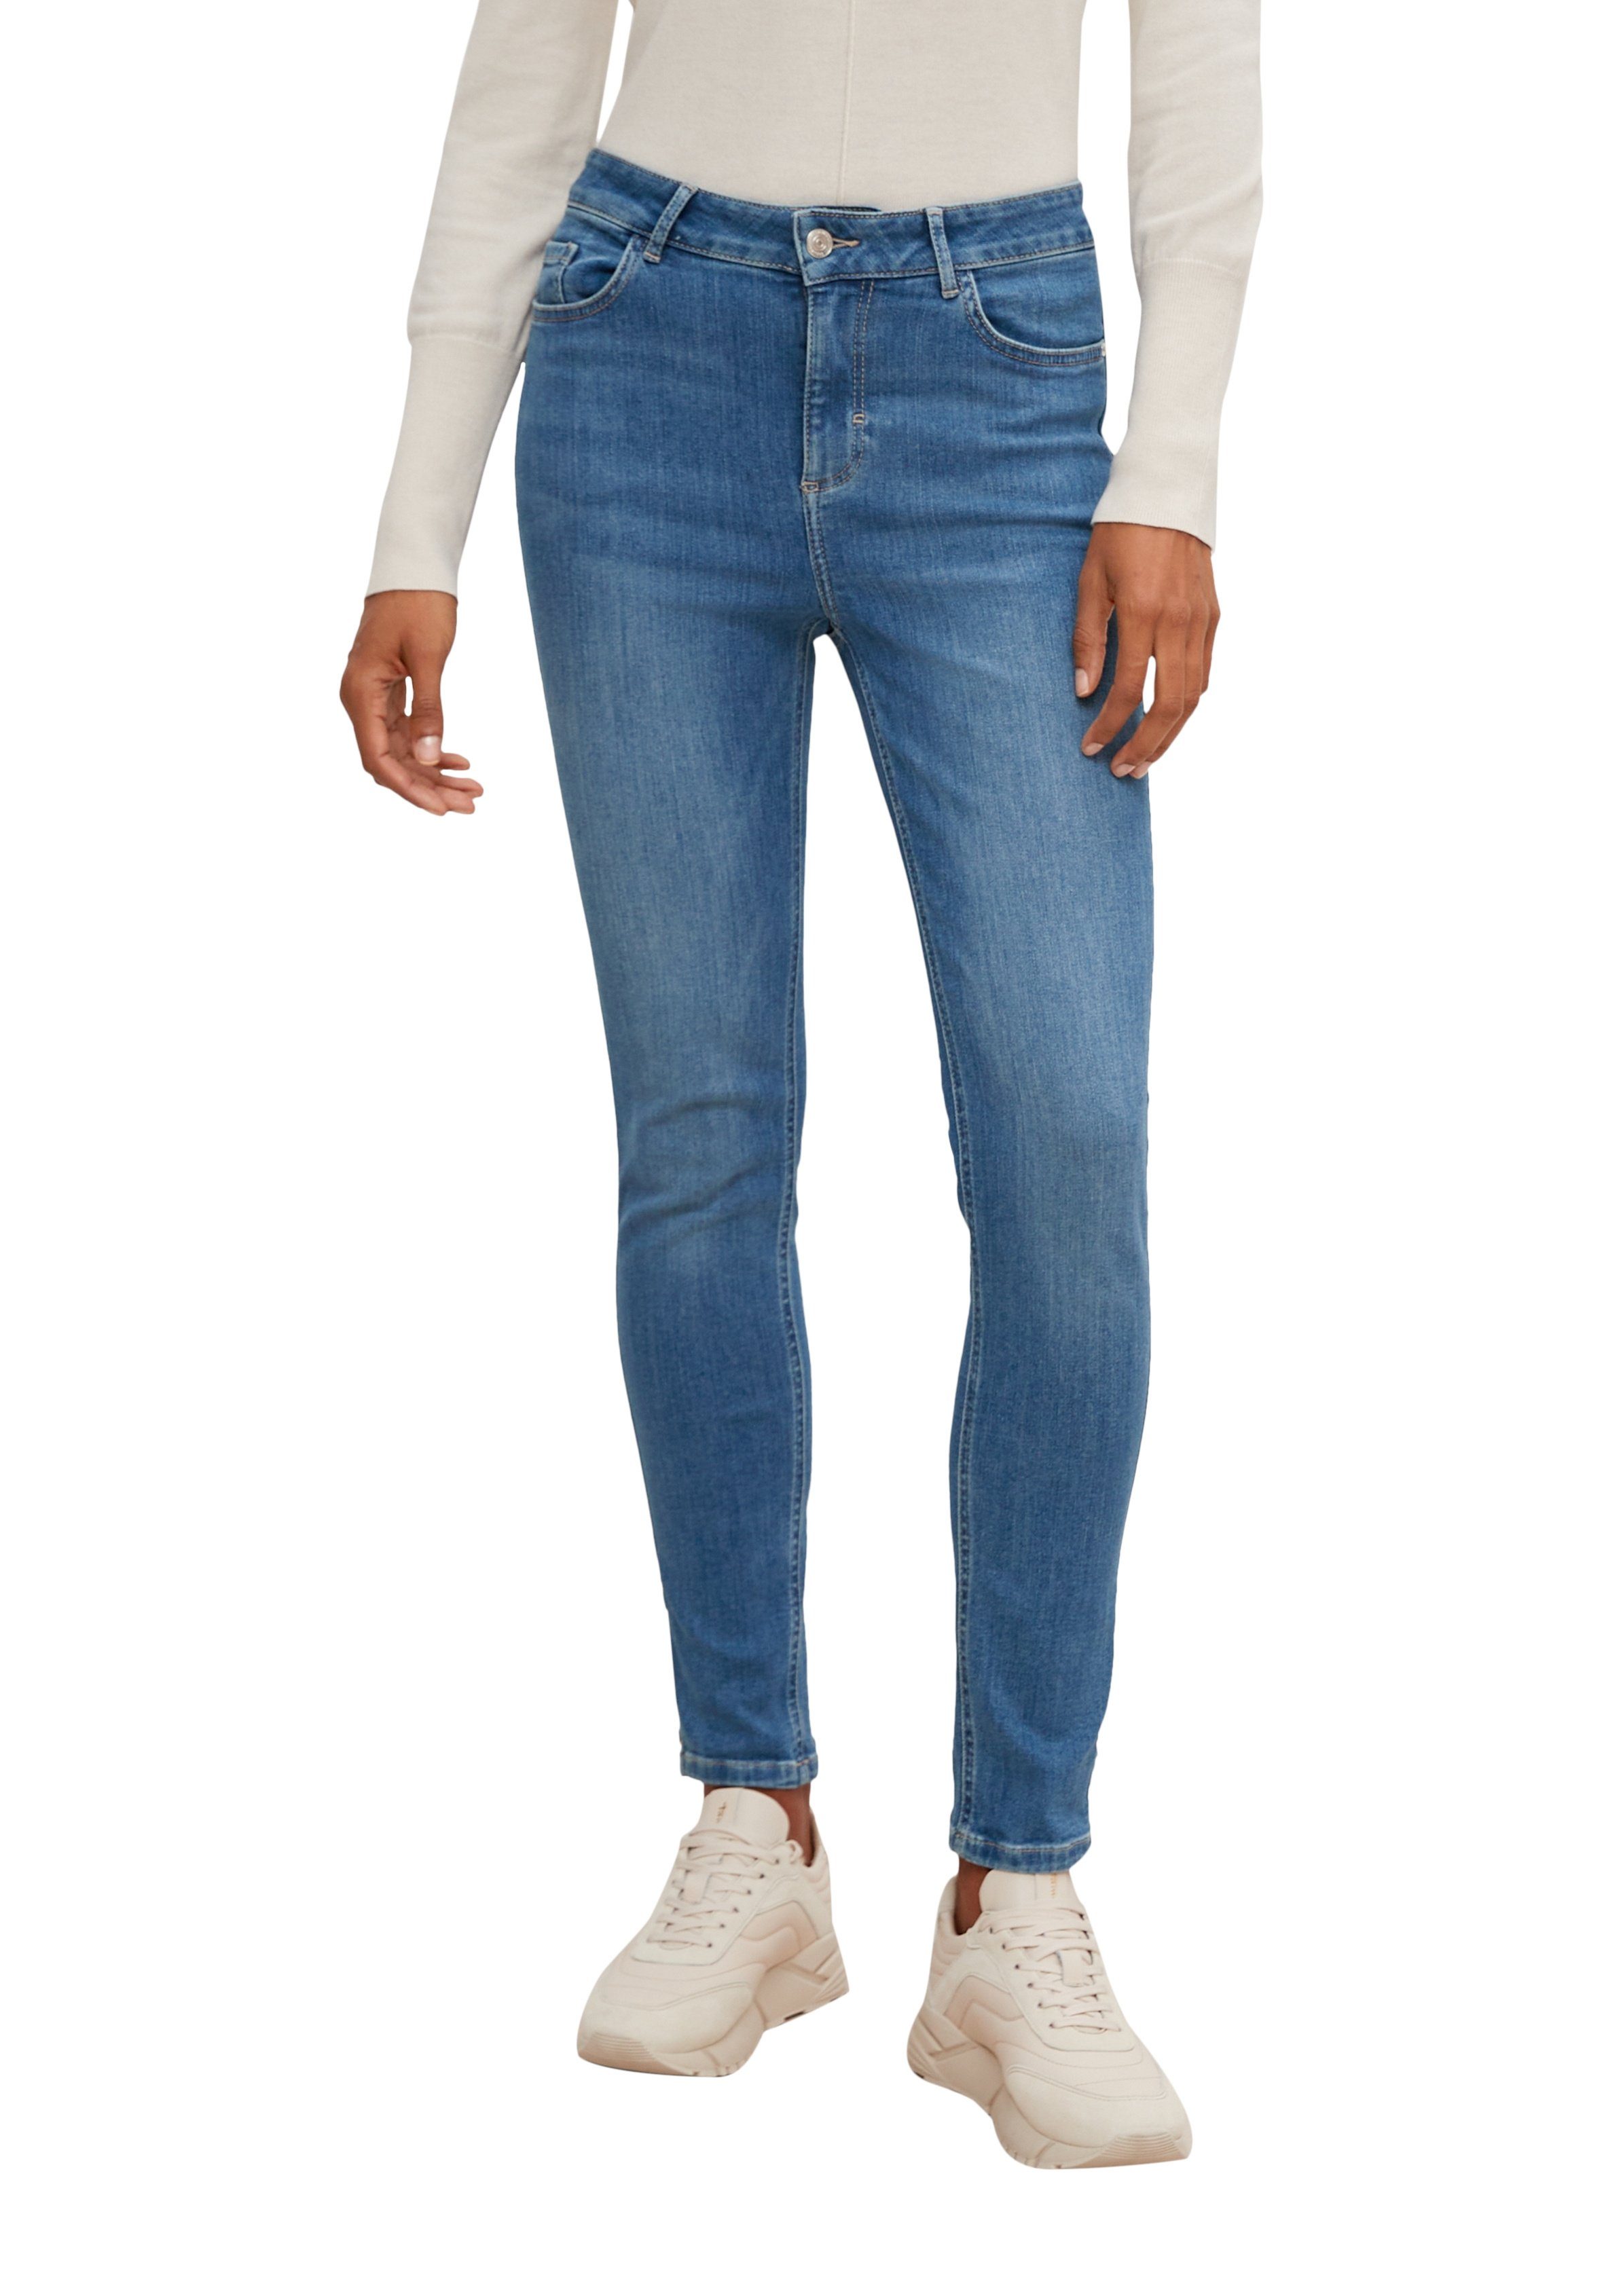 Jeanshose comma identity Skinny-fit-Jeans casual